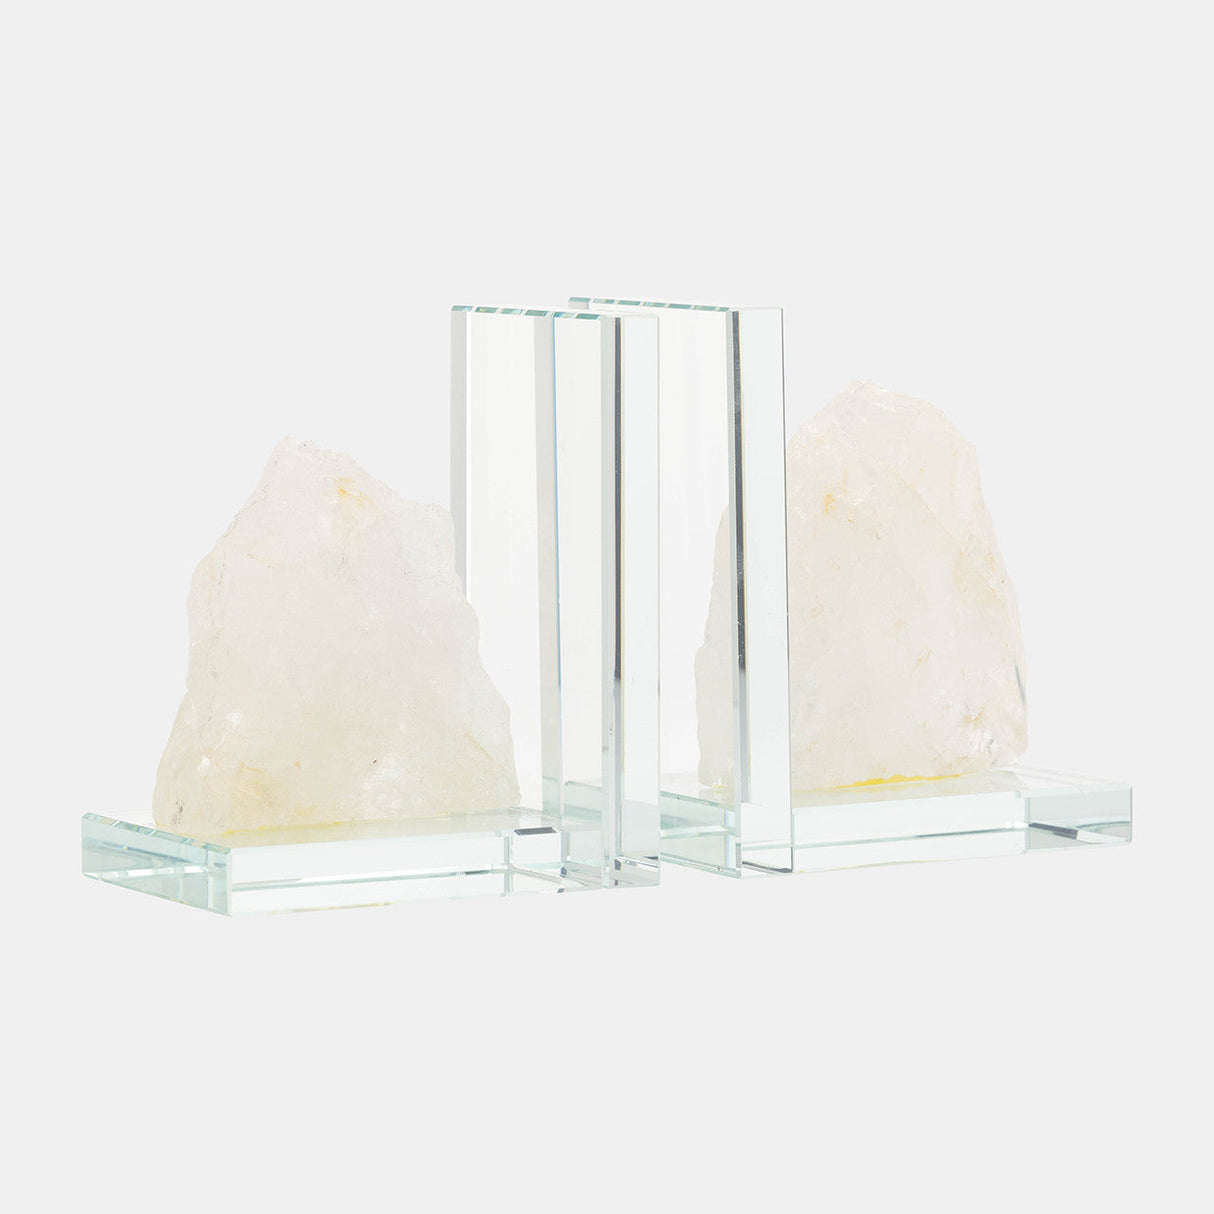 Glass, S/2 5"h Bookends With White Stone, Clear